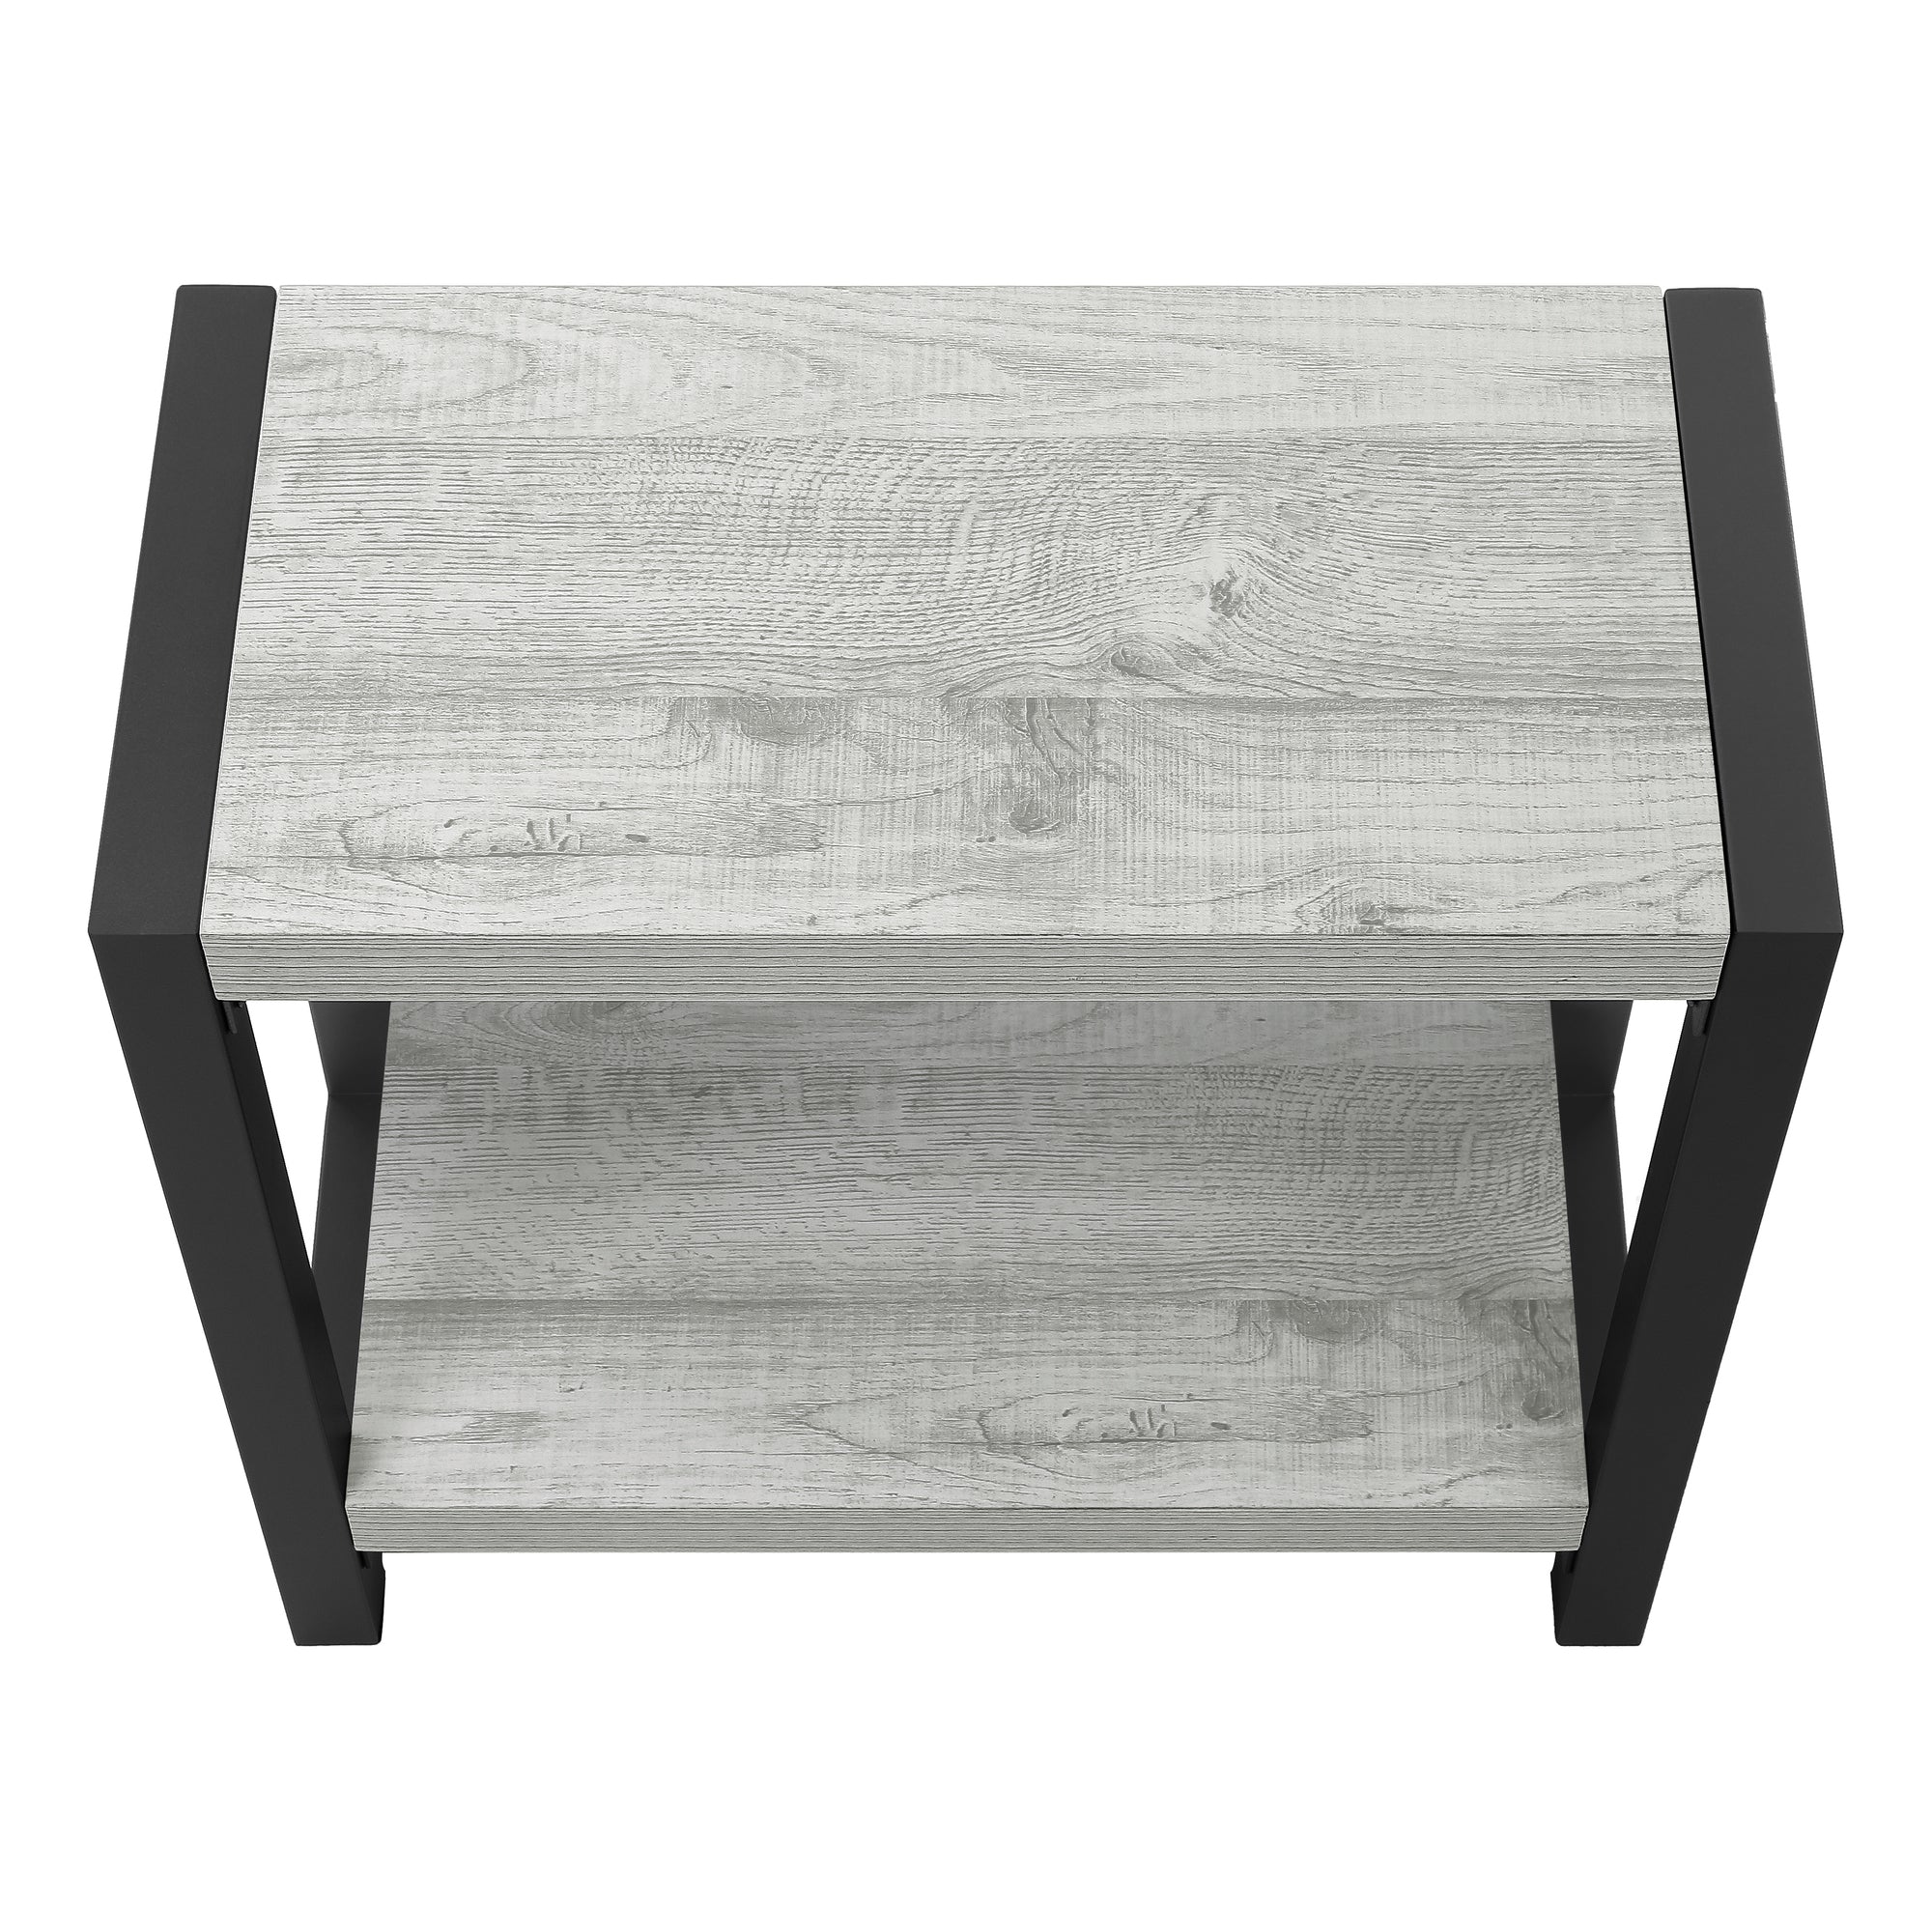 MN-882082    Accent Table, Side, End, Narrow, Small, Living Room, Bedroom, 2 Tier, Metal Legs, Laminate, Grey, Black, Contemporary, Modern